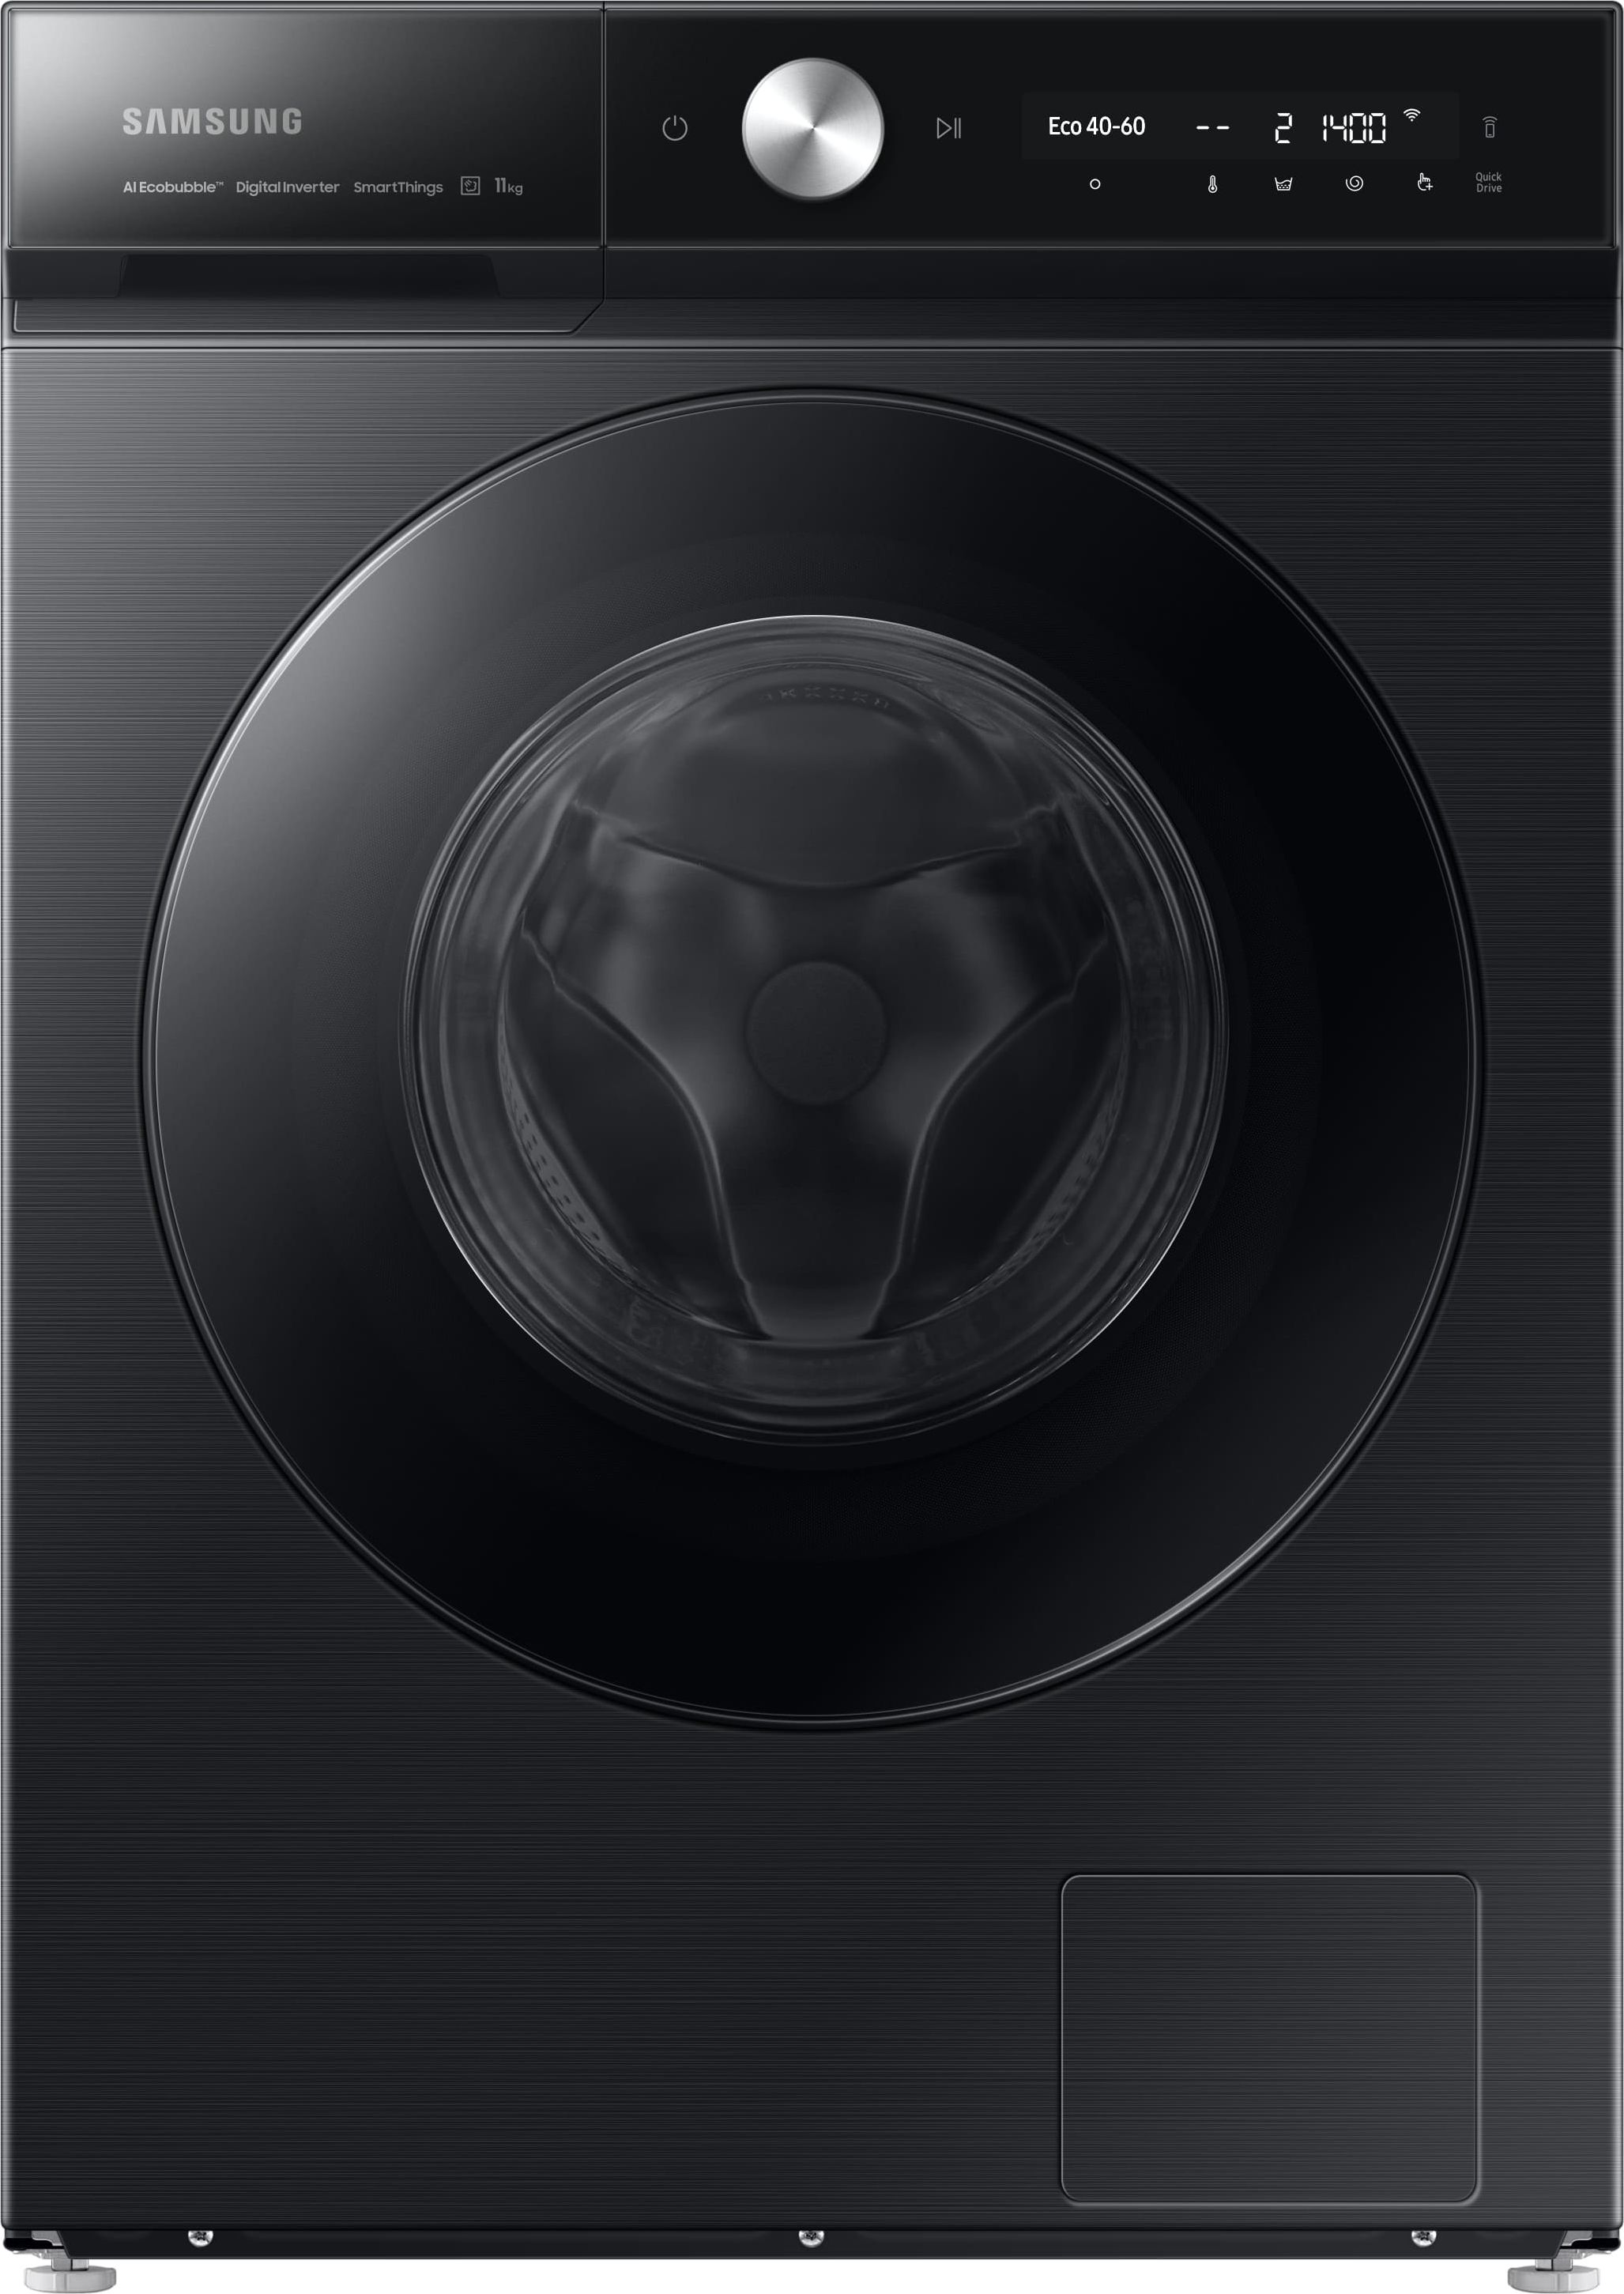 Samsung Series 8 QuickDrive SpaceMax WW11BB944DGB 11kg Washing Machine with 1400 rpm - Black - A Rated, Black